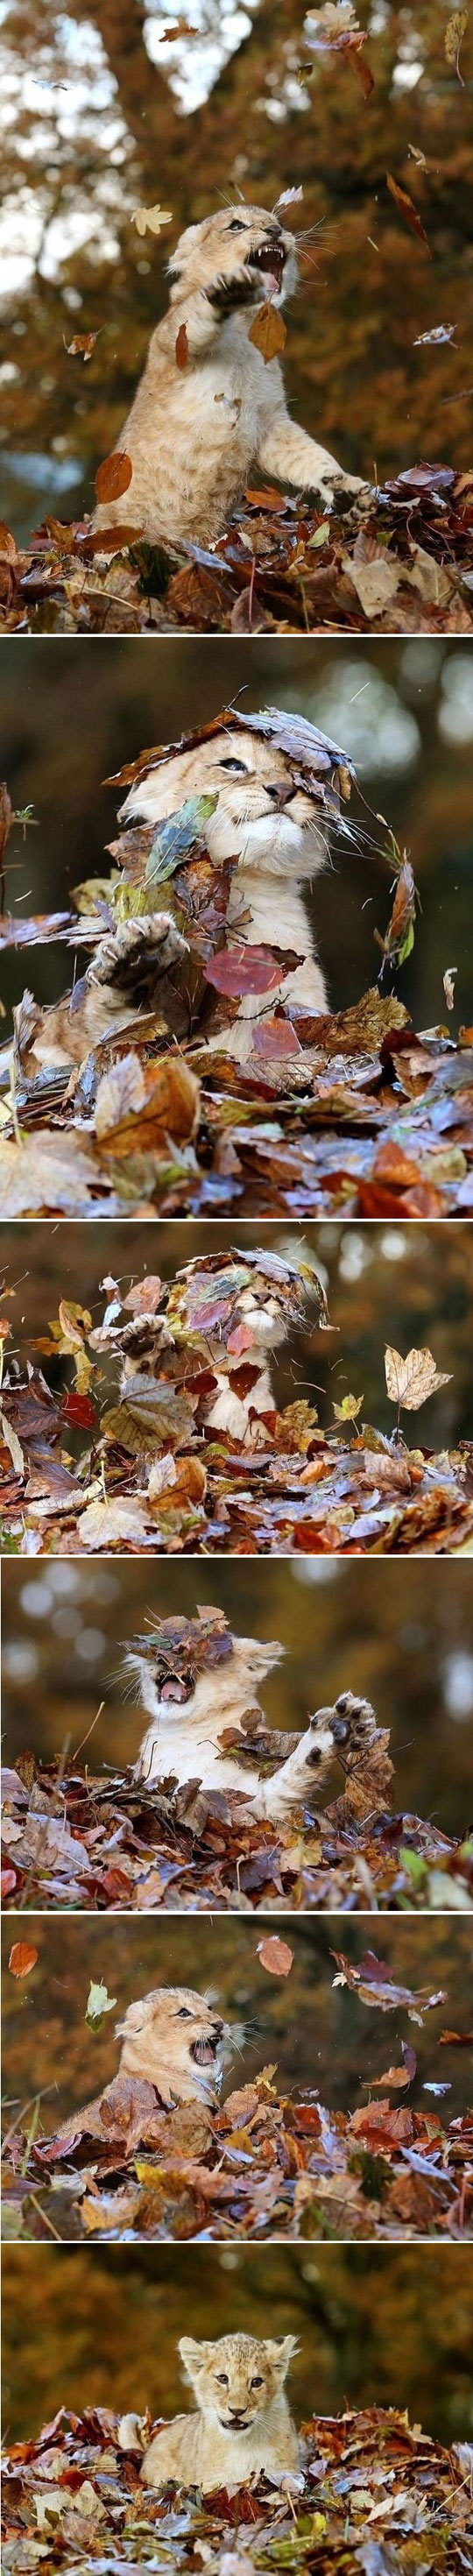 Tiny Baby Lion Playing With Leaves